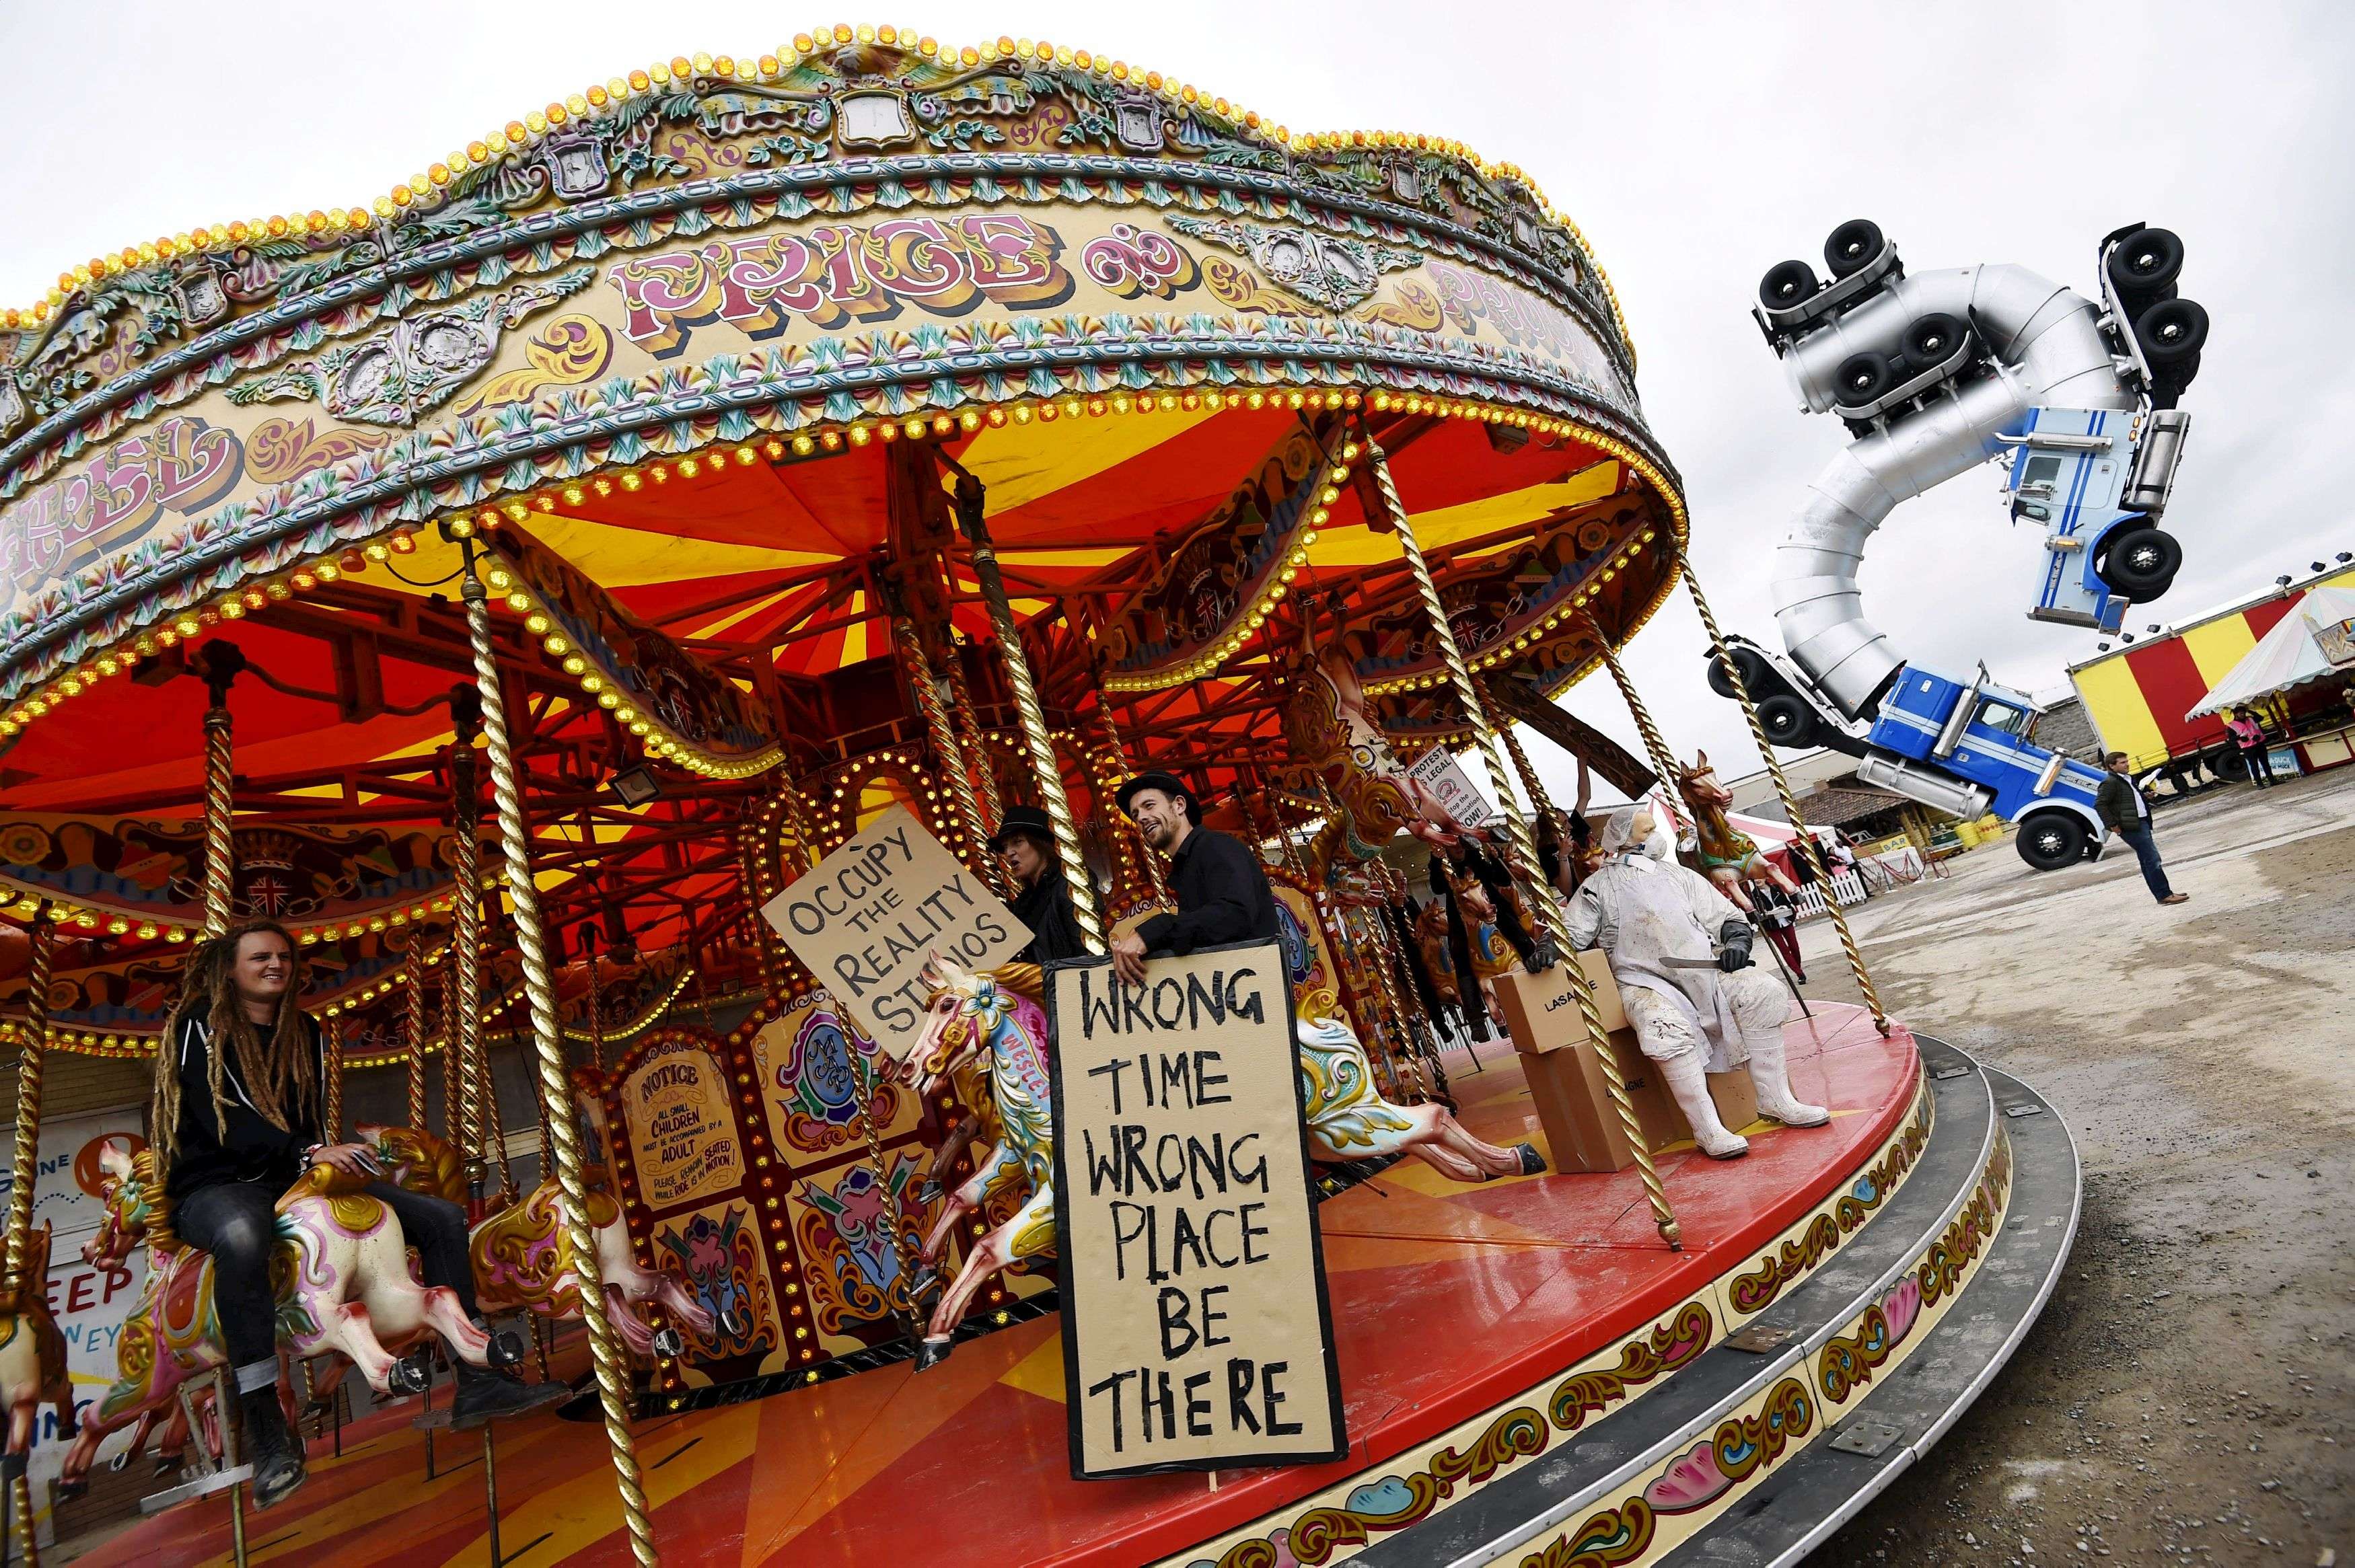 People ride a carousel at 'Dismaland', a theme park-styled art installation by British artist Banksy, at Weston-Super-Mare in southwest England, Britain, August 20, 2015. REUTERS/Toby Melville